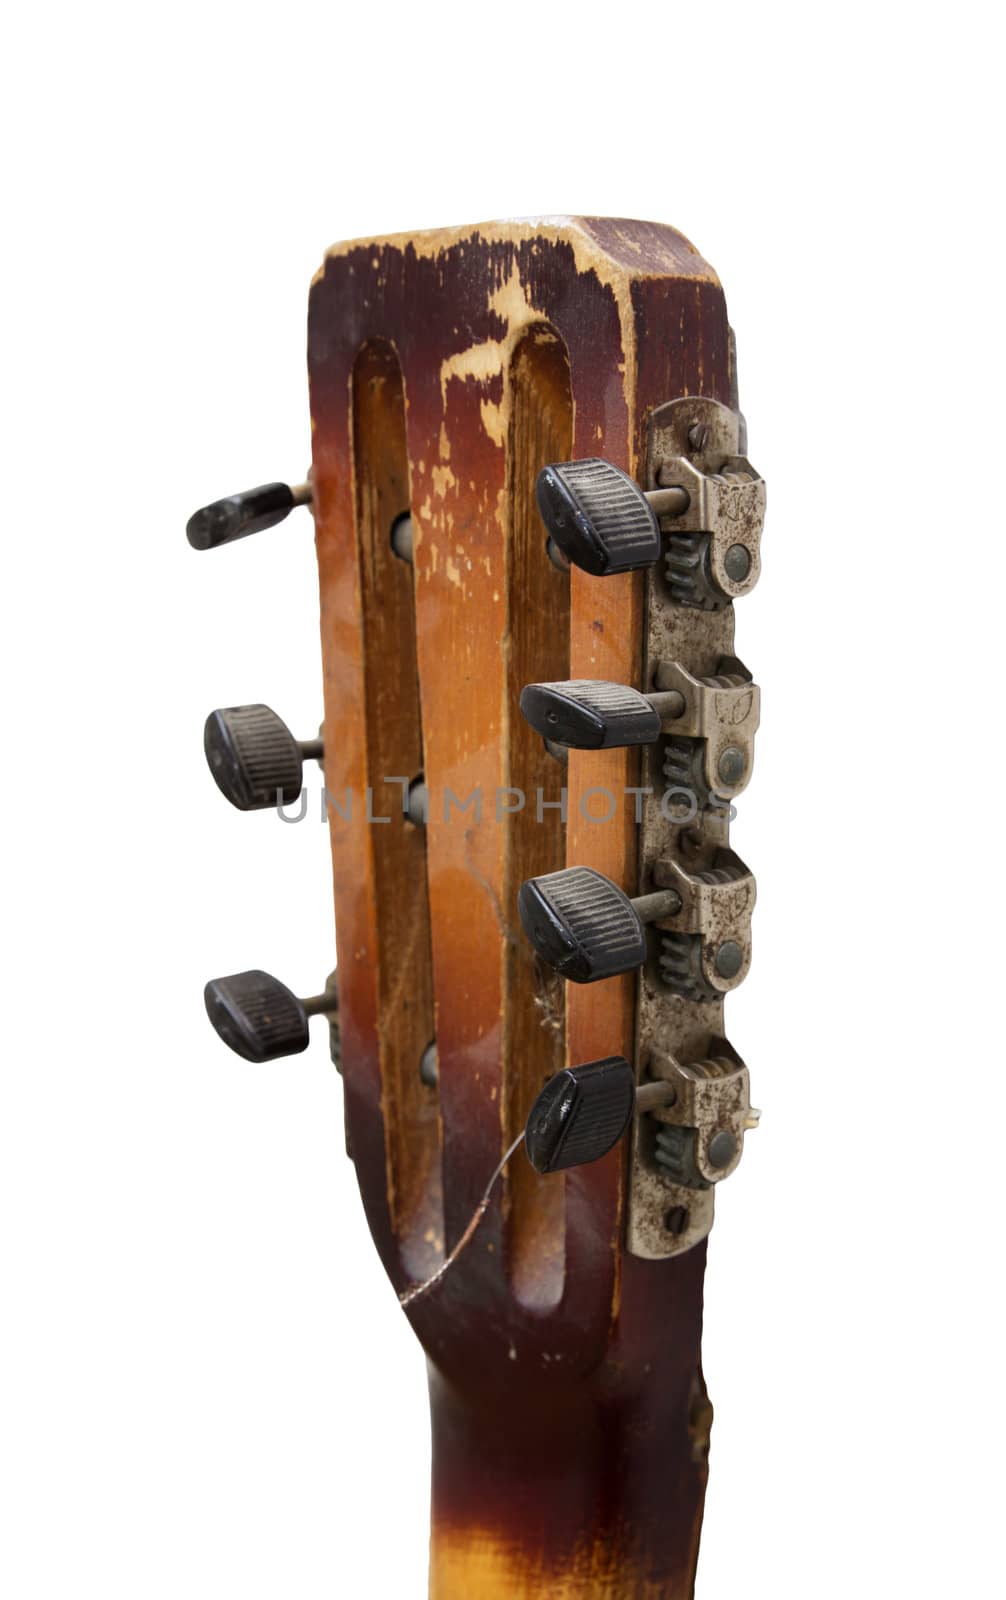 an old guitar on white background by schankz